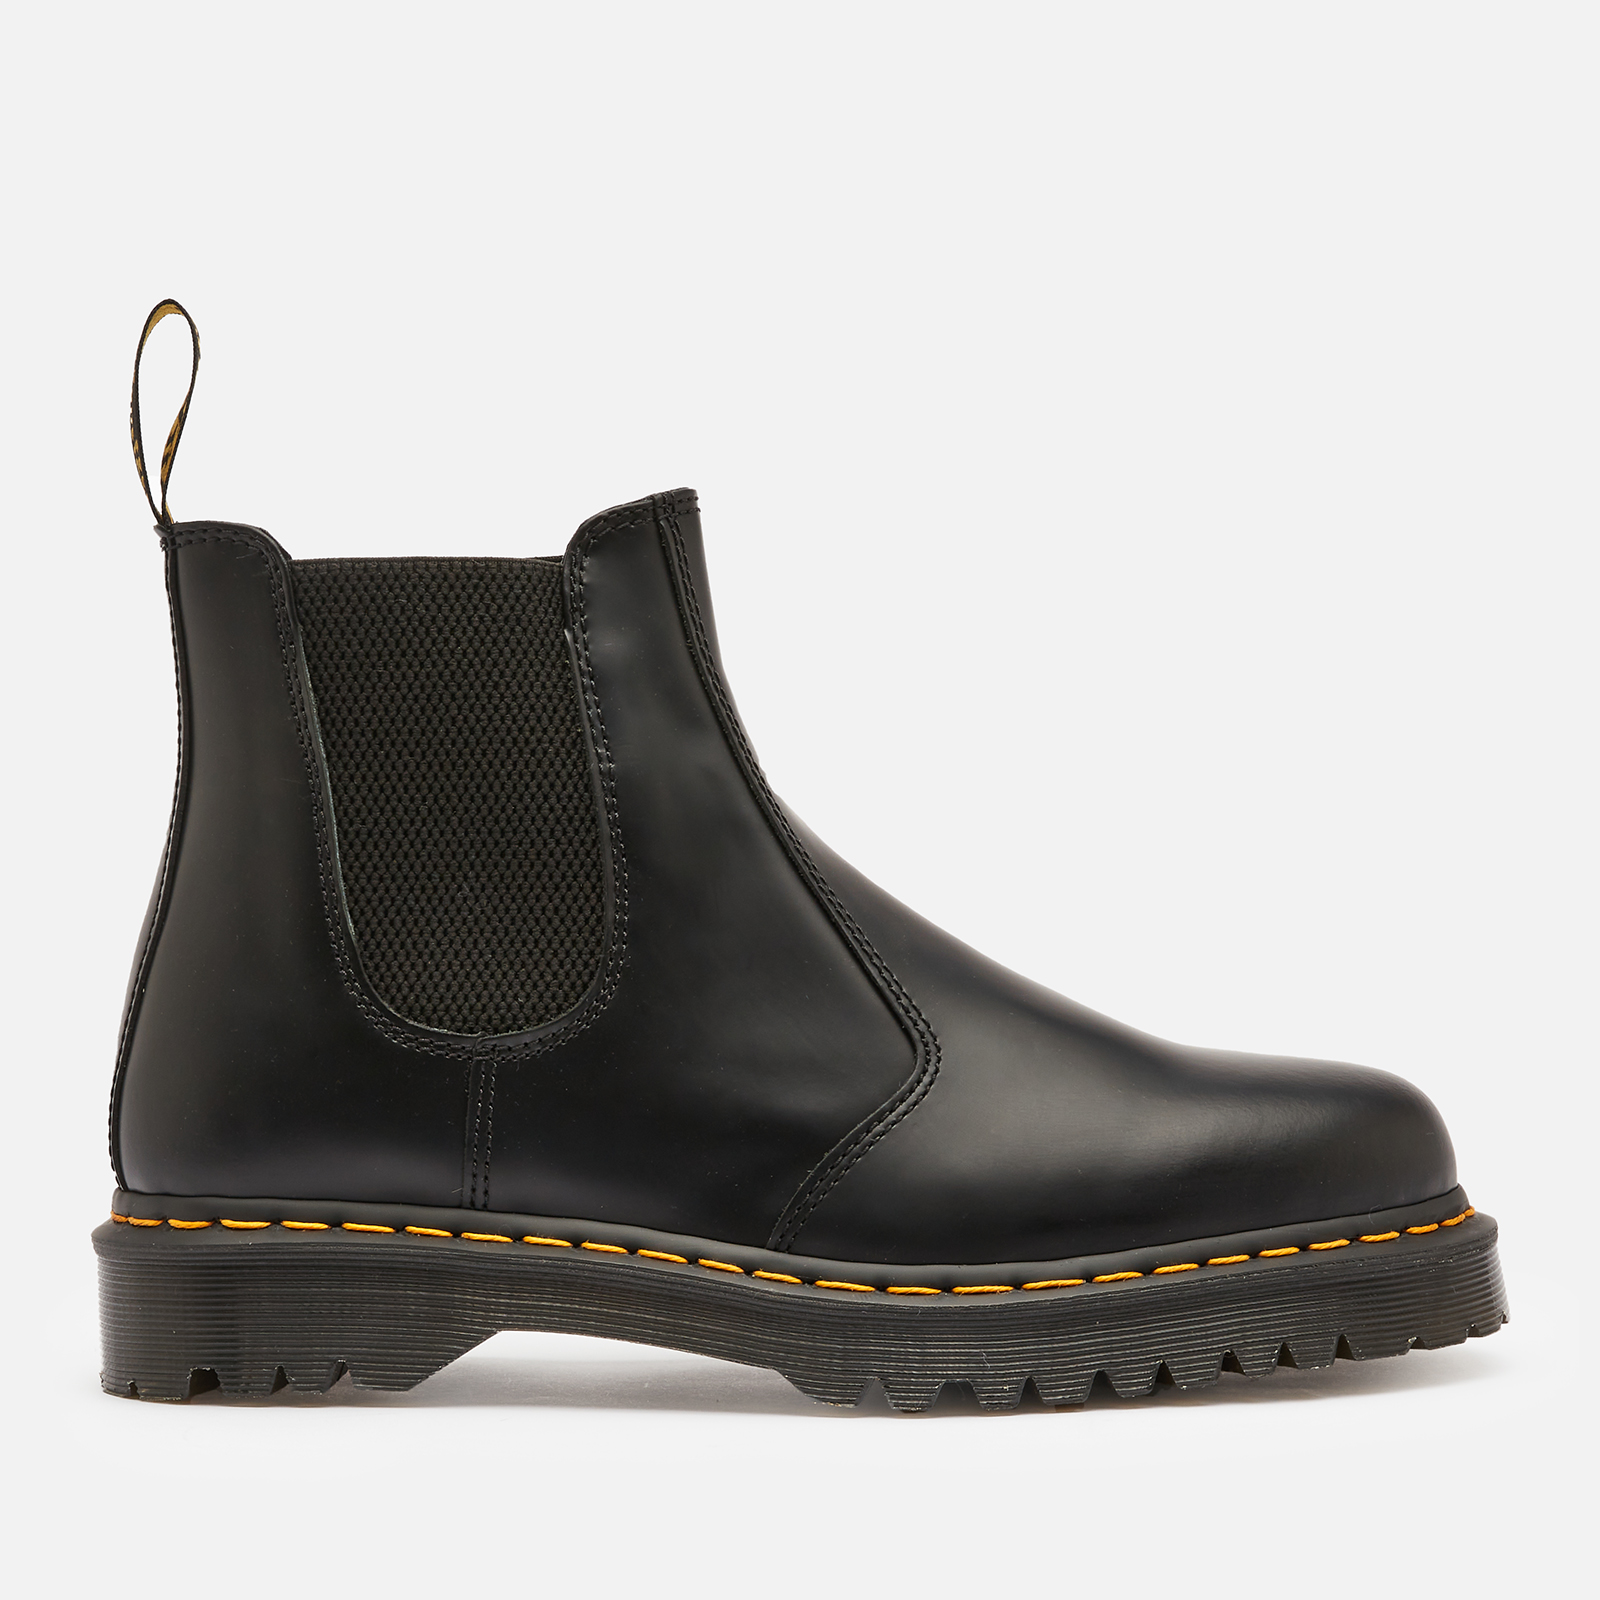 Dr. Martens 2976 Bex Smooth Leather Chelsea Boots - Black - UK 3 | Coggles